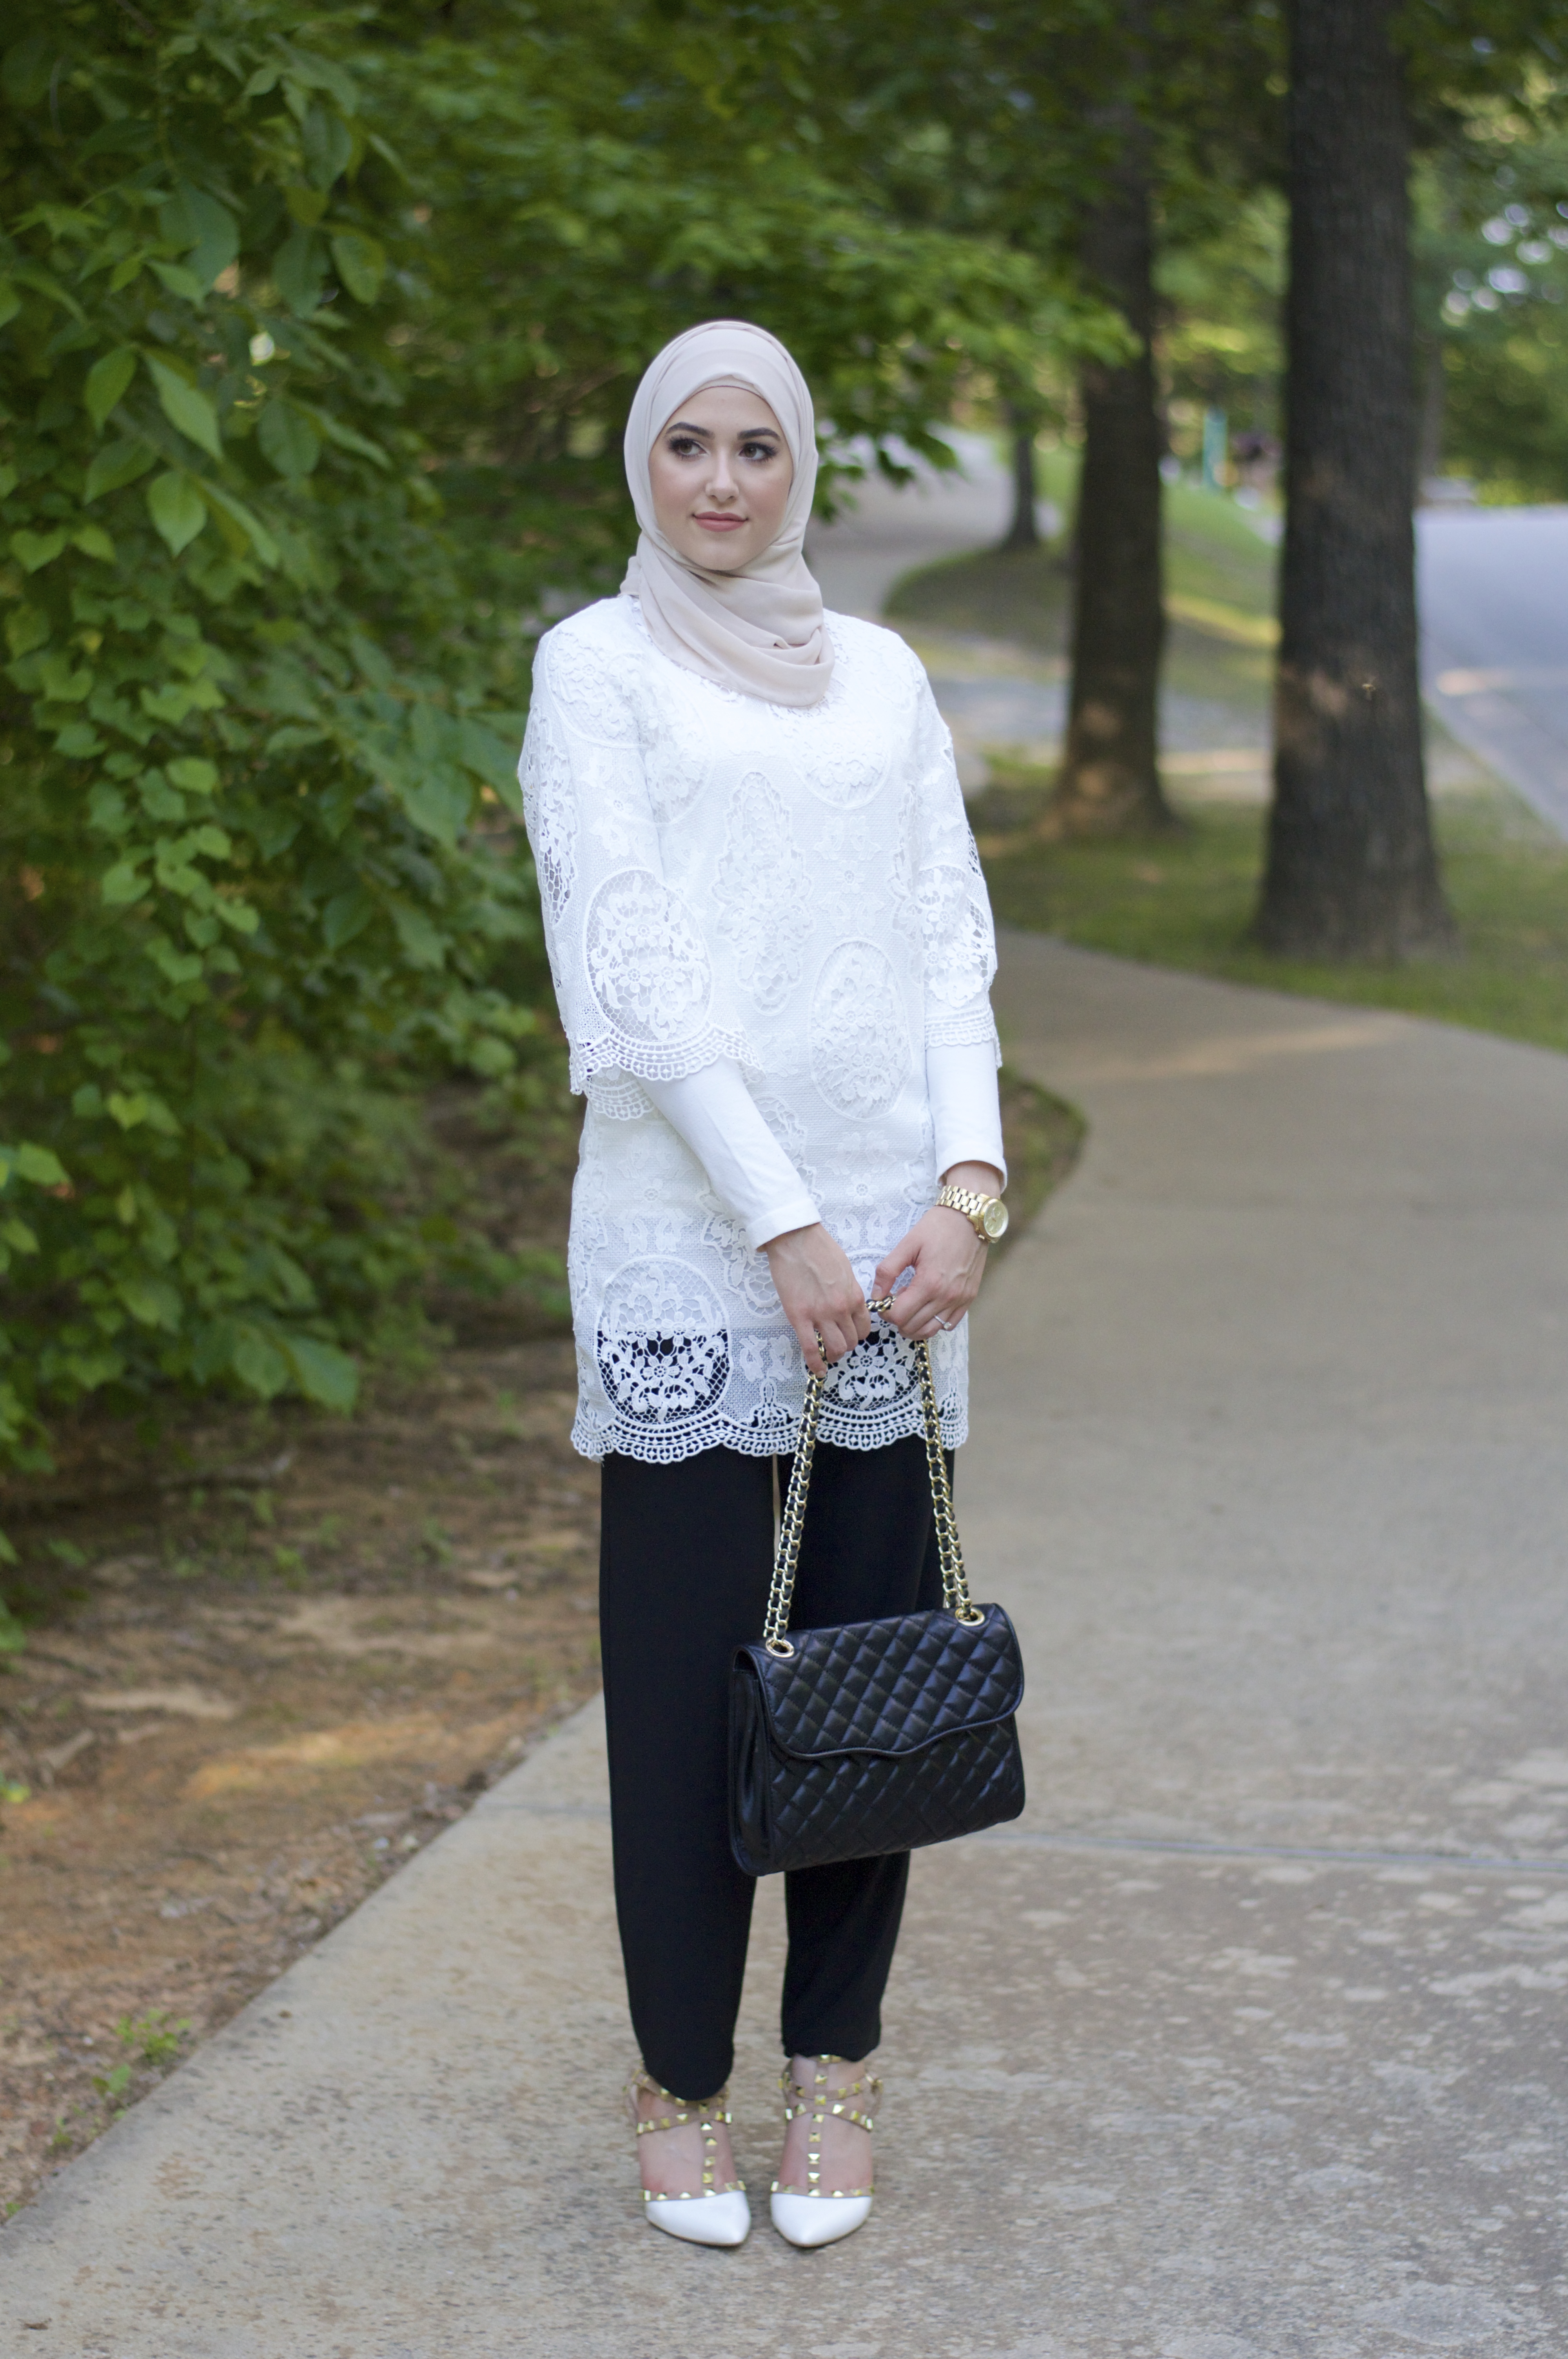 5 Tips for Choosing your Hijabi Graduation Outfit – With Love, Leena.